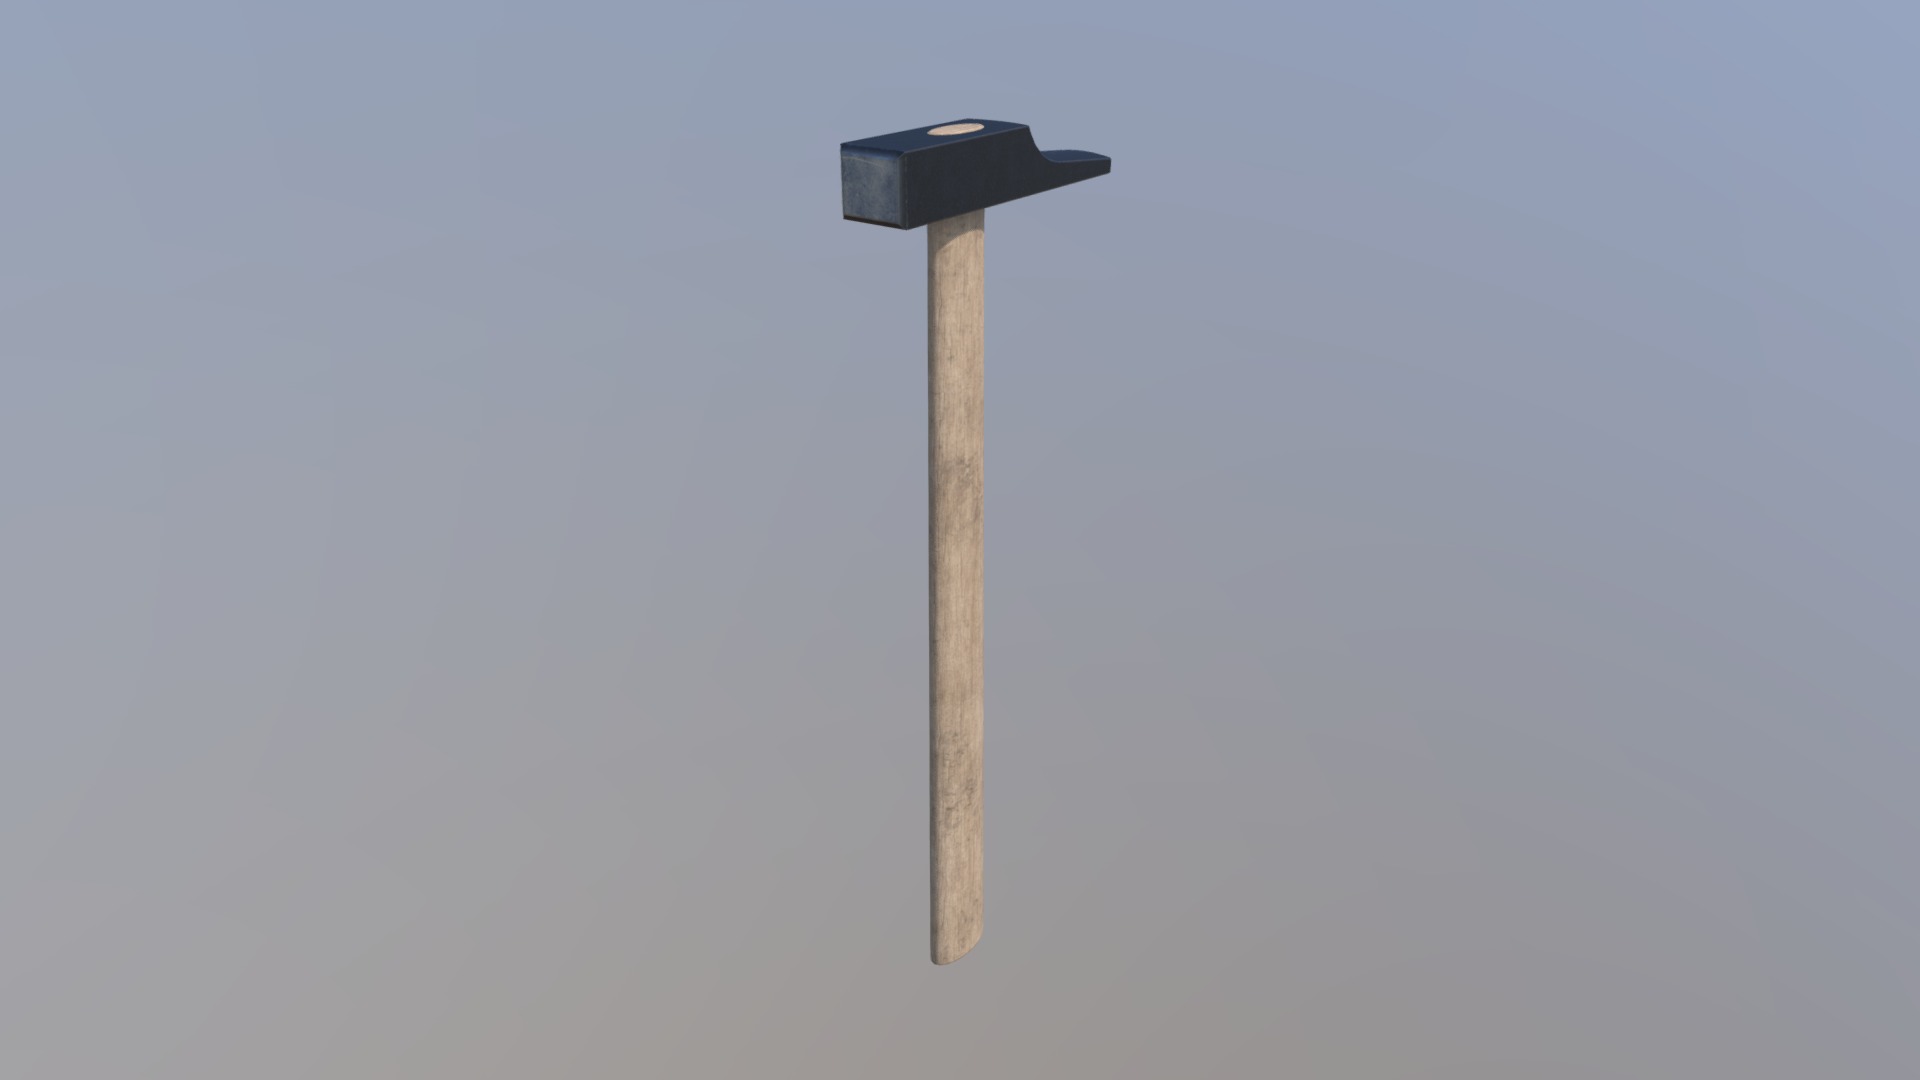 3D model Cabinetmaker’s hammer - This is a 3D model of the Cabinetmaker's hammer. The 3D model is about a wooden post with a black top.